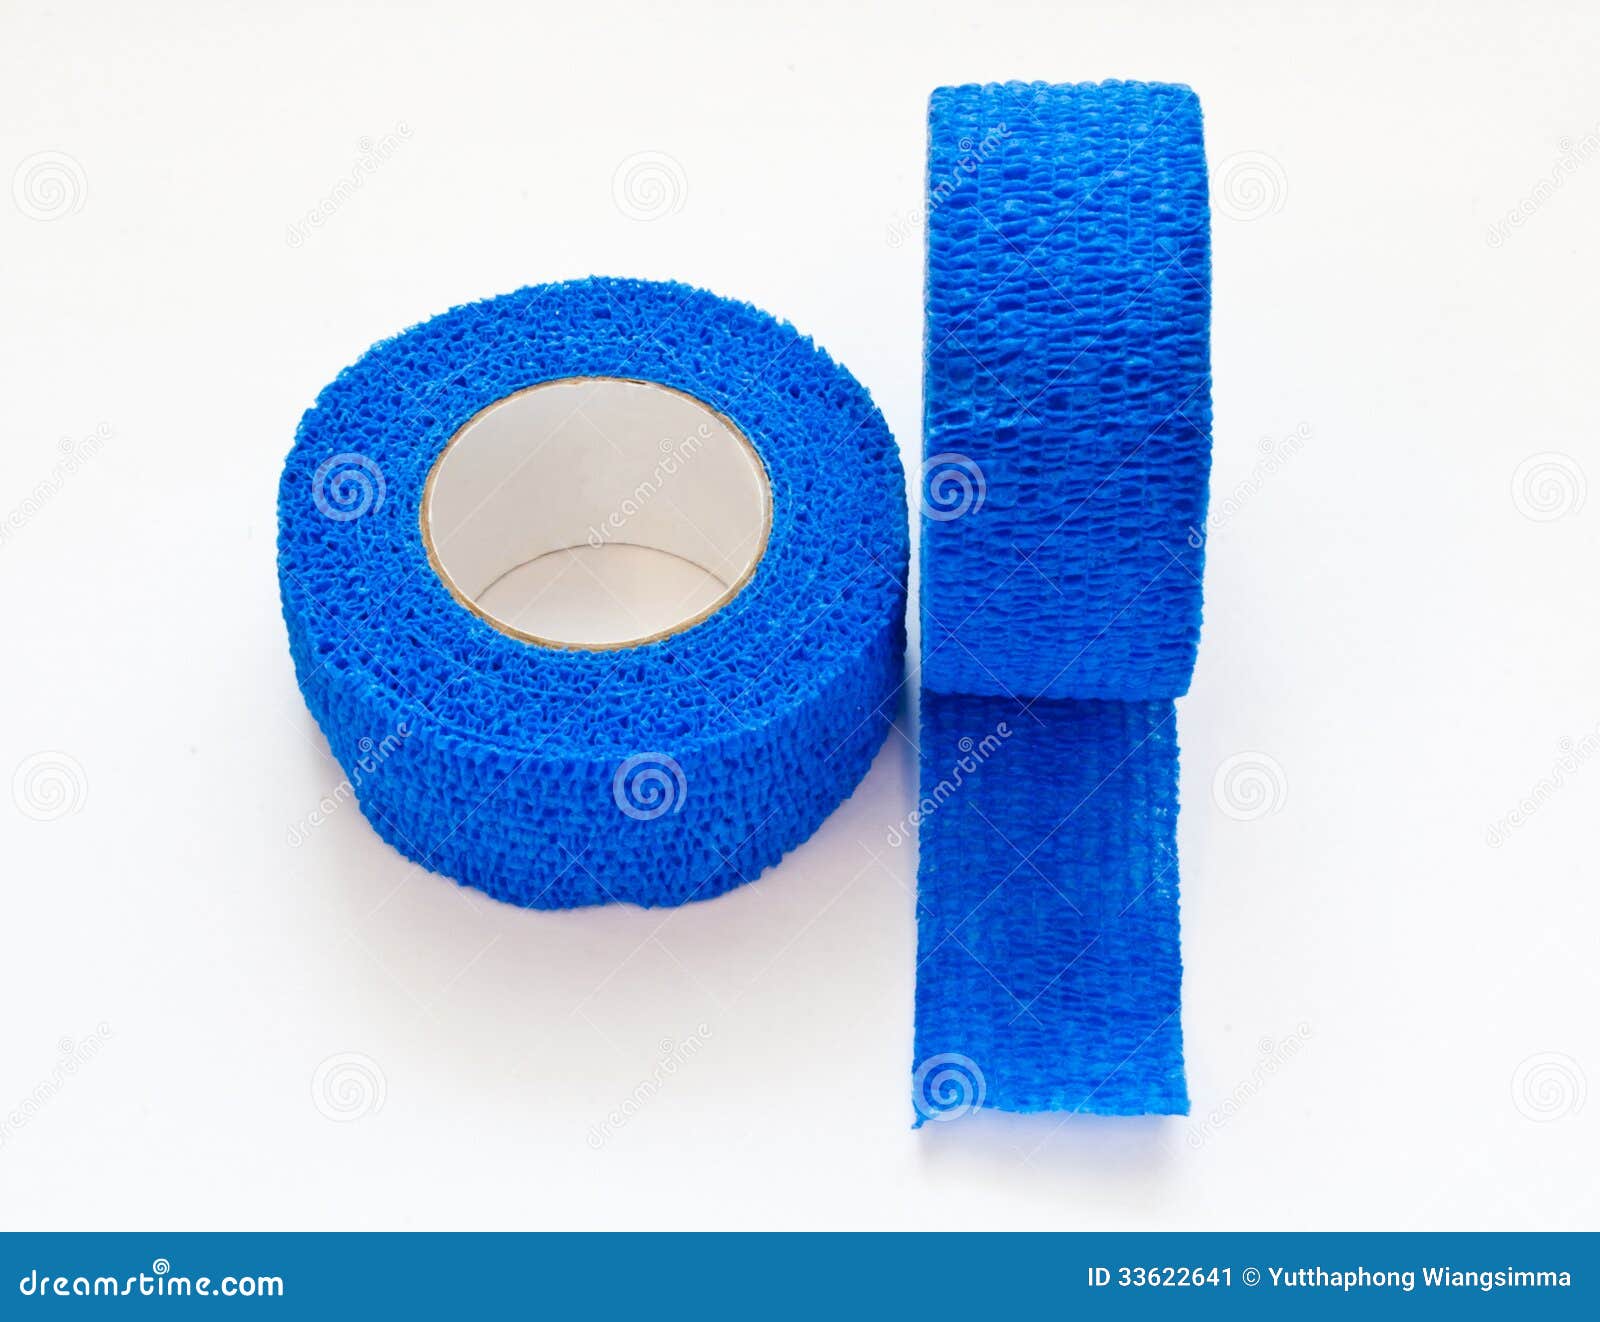 Blue Medical Hair Net - Elastic Band for Secure Fit - wide 11